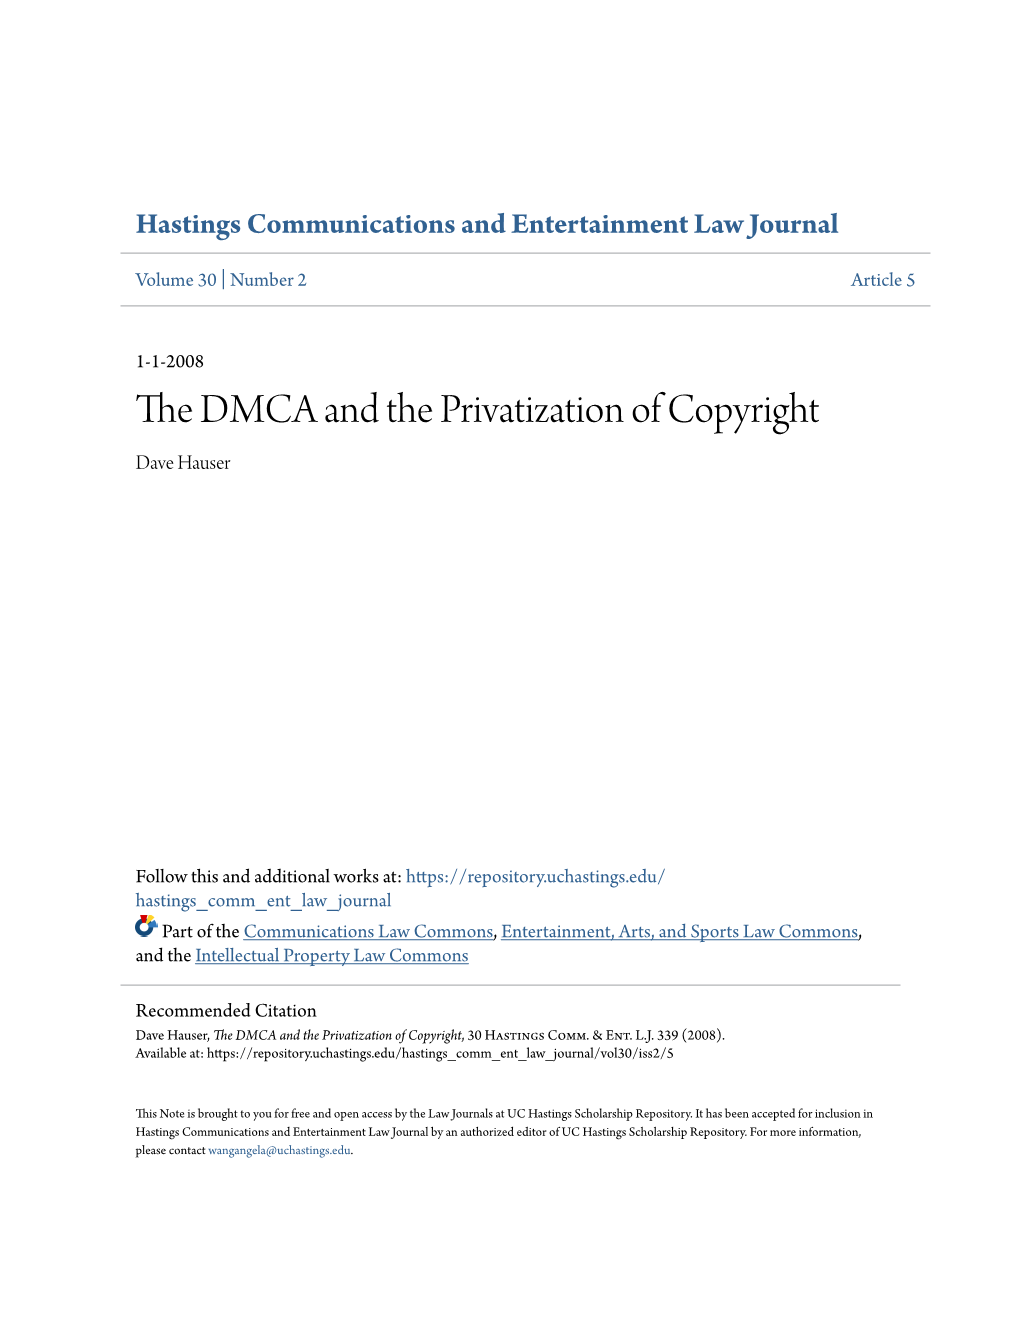 The DMCA and the Privatization of Copyright Dave Hauser